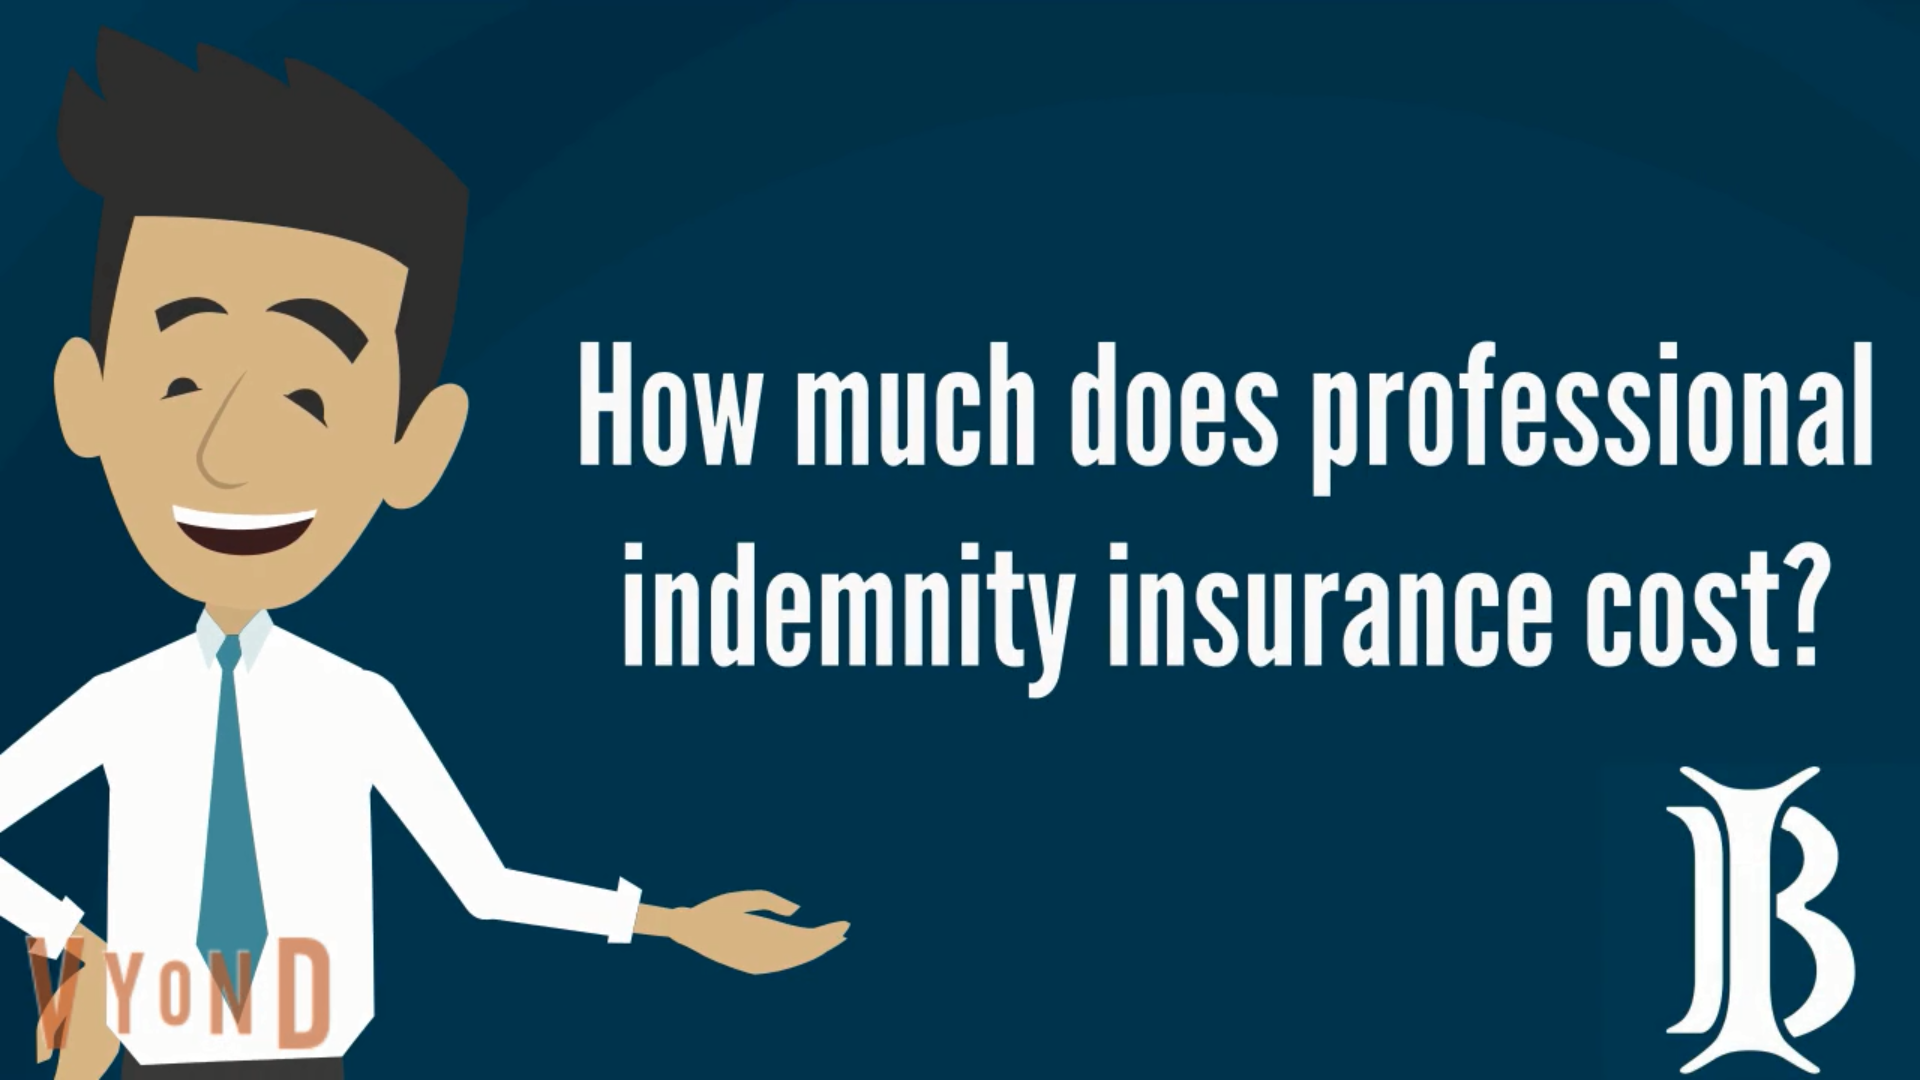 How Much Does Professional Indemnity Insurance Cost?